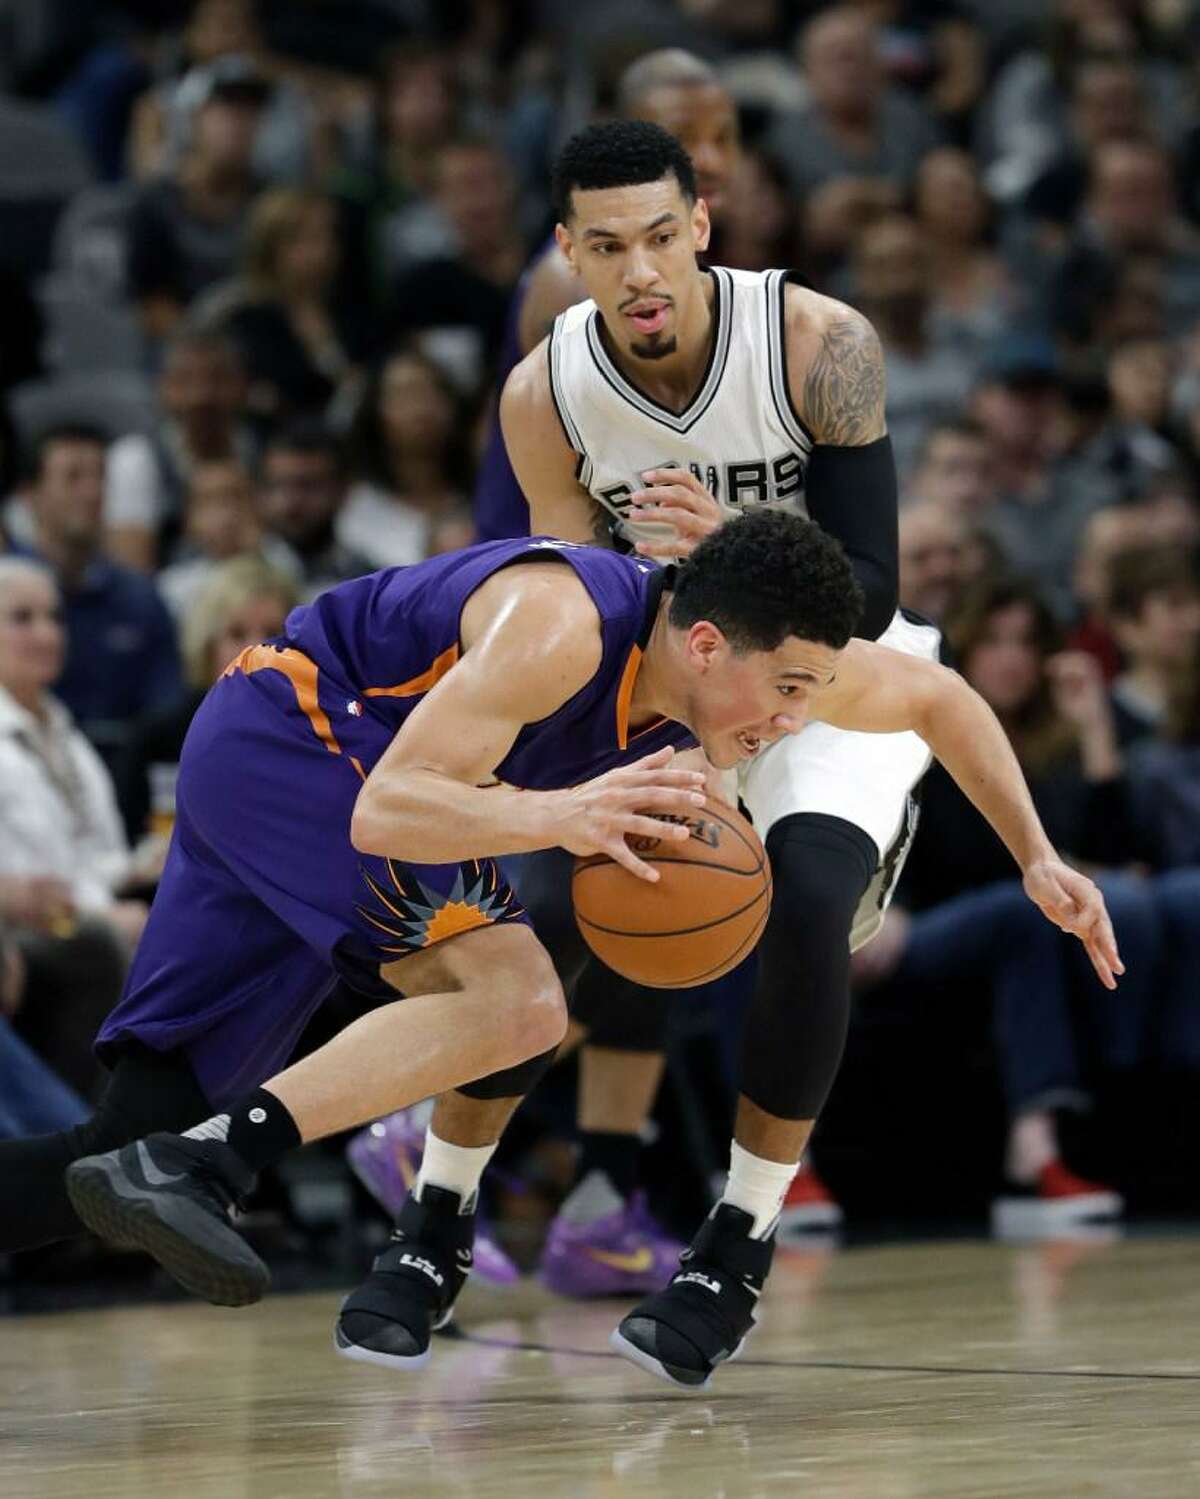 Phoenix Suns guard Devin Booker, front, drives around San Antonio Spurs guard Danny Green, rear, during the first half of an NBA basketball game, Wednesday, Dec. 28, 2016, in San Antonio. San Antonio Spurs won 119-98.